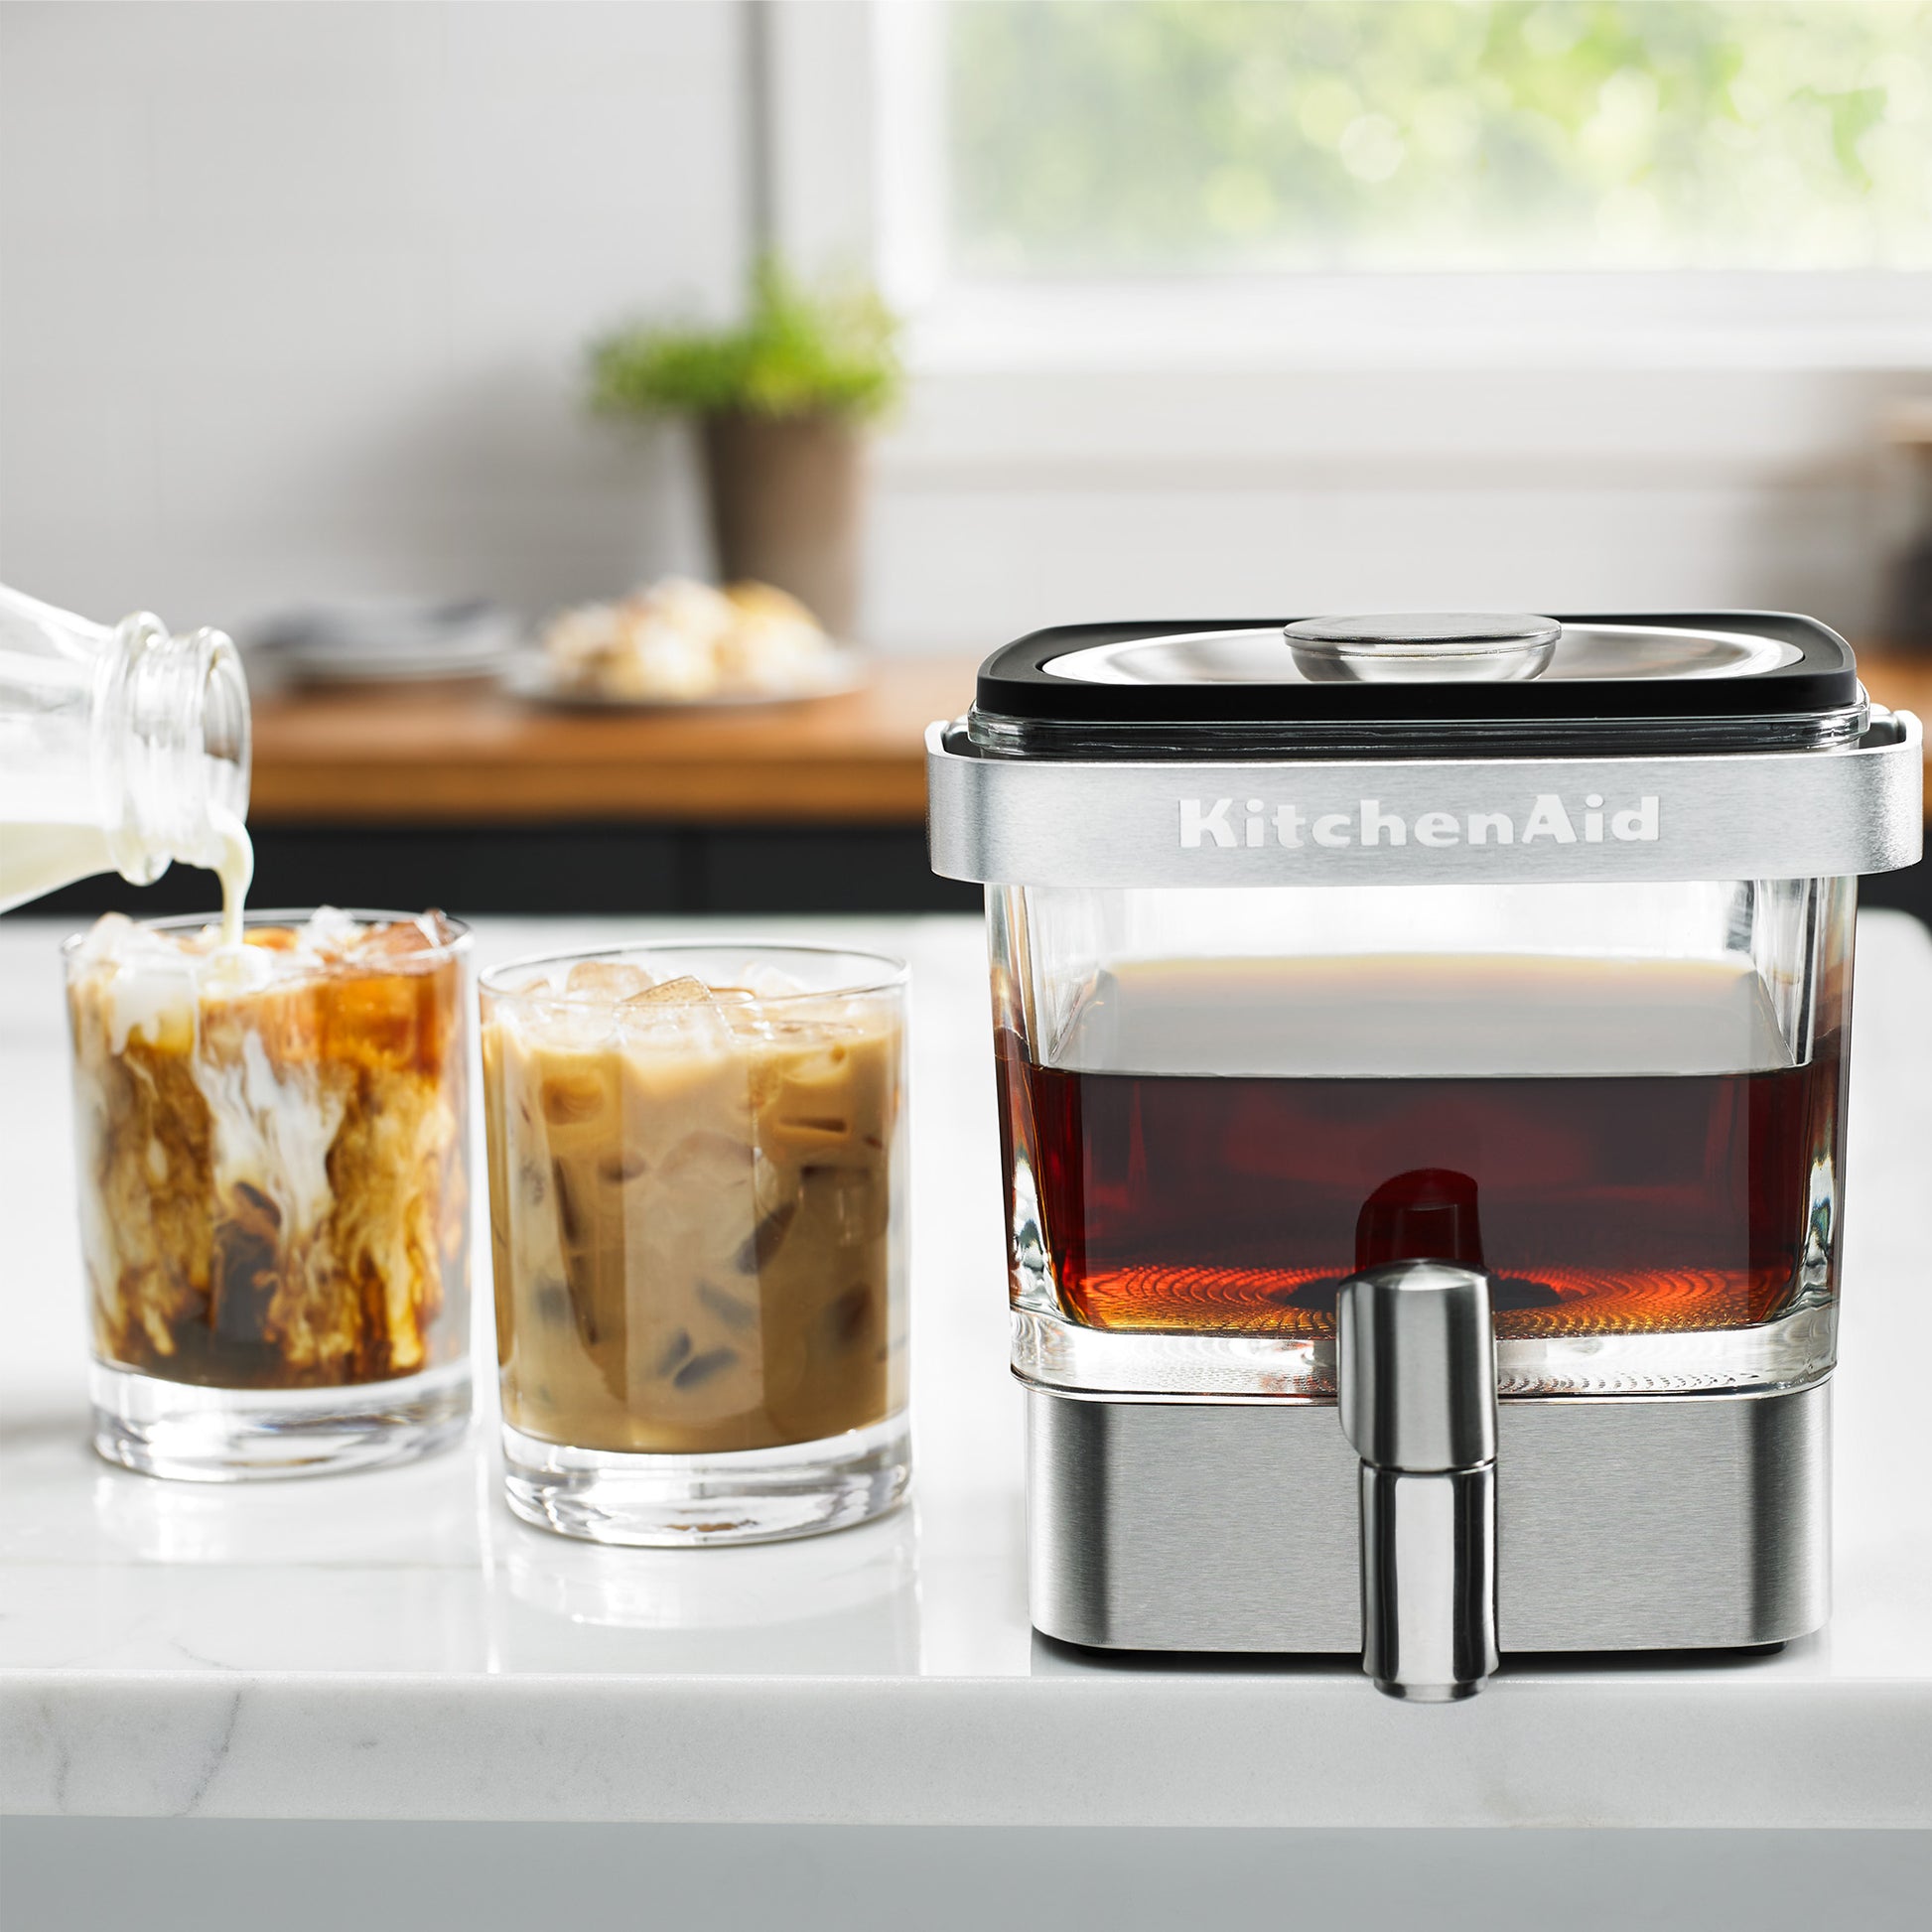 Kitchenaid Cold Brew Coffee Maker Review